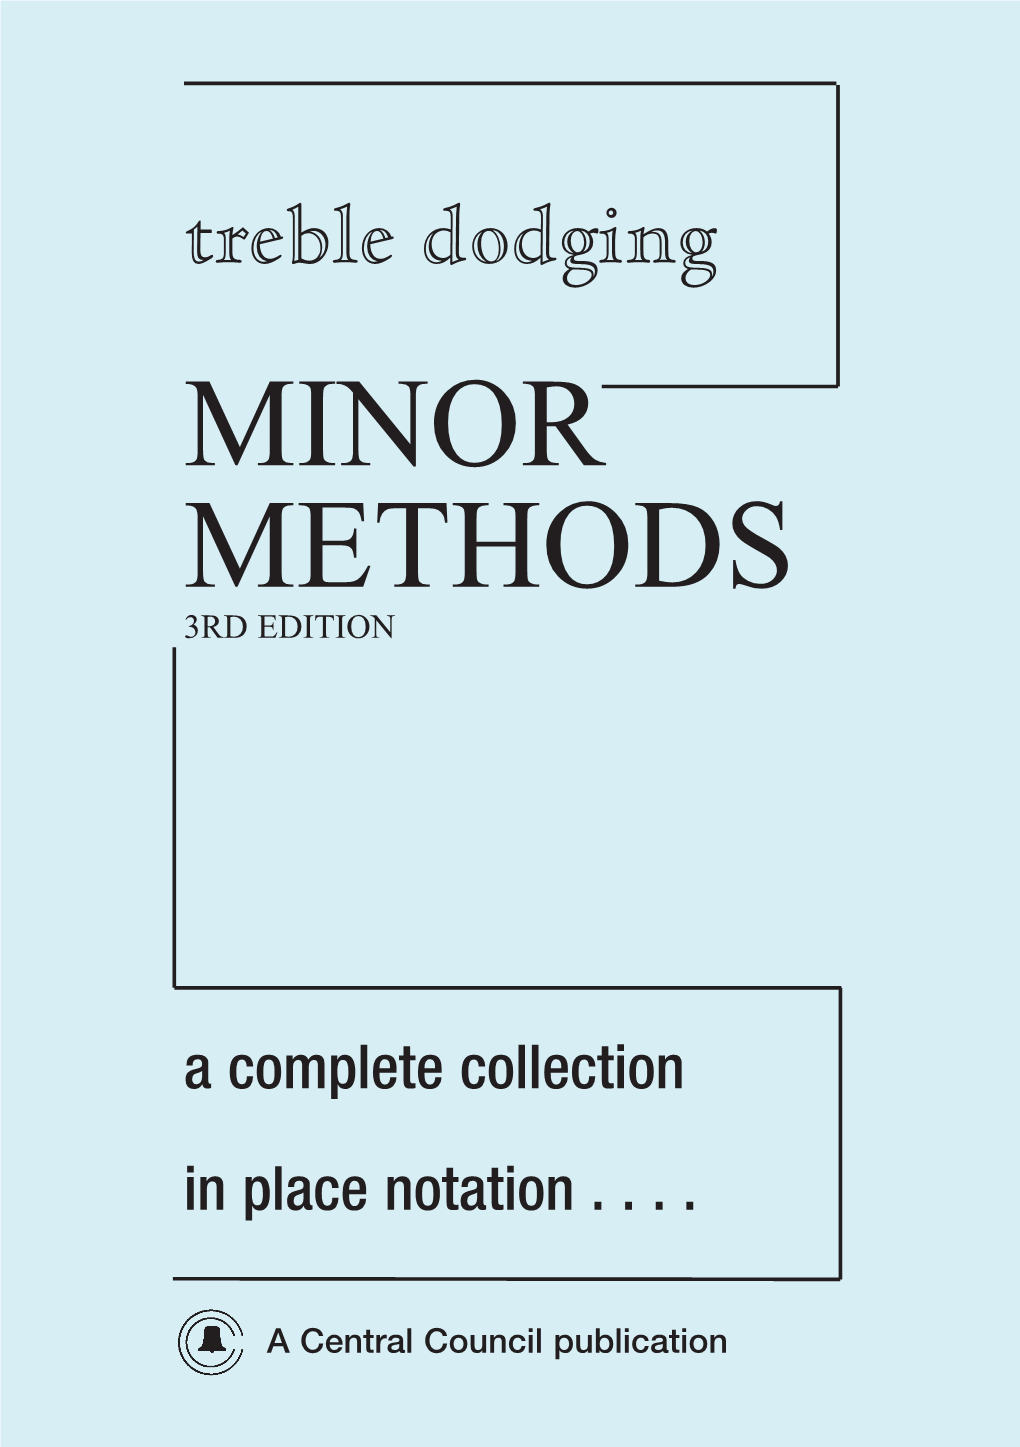 Treble Dodging MINOR METHODS 3RD EDITION Central Council of Church Bell Ringers 2008